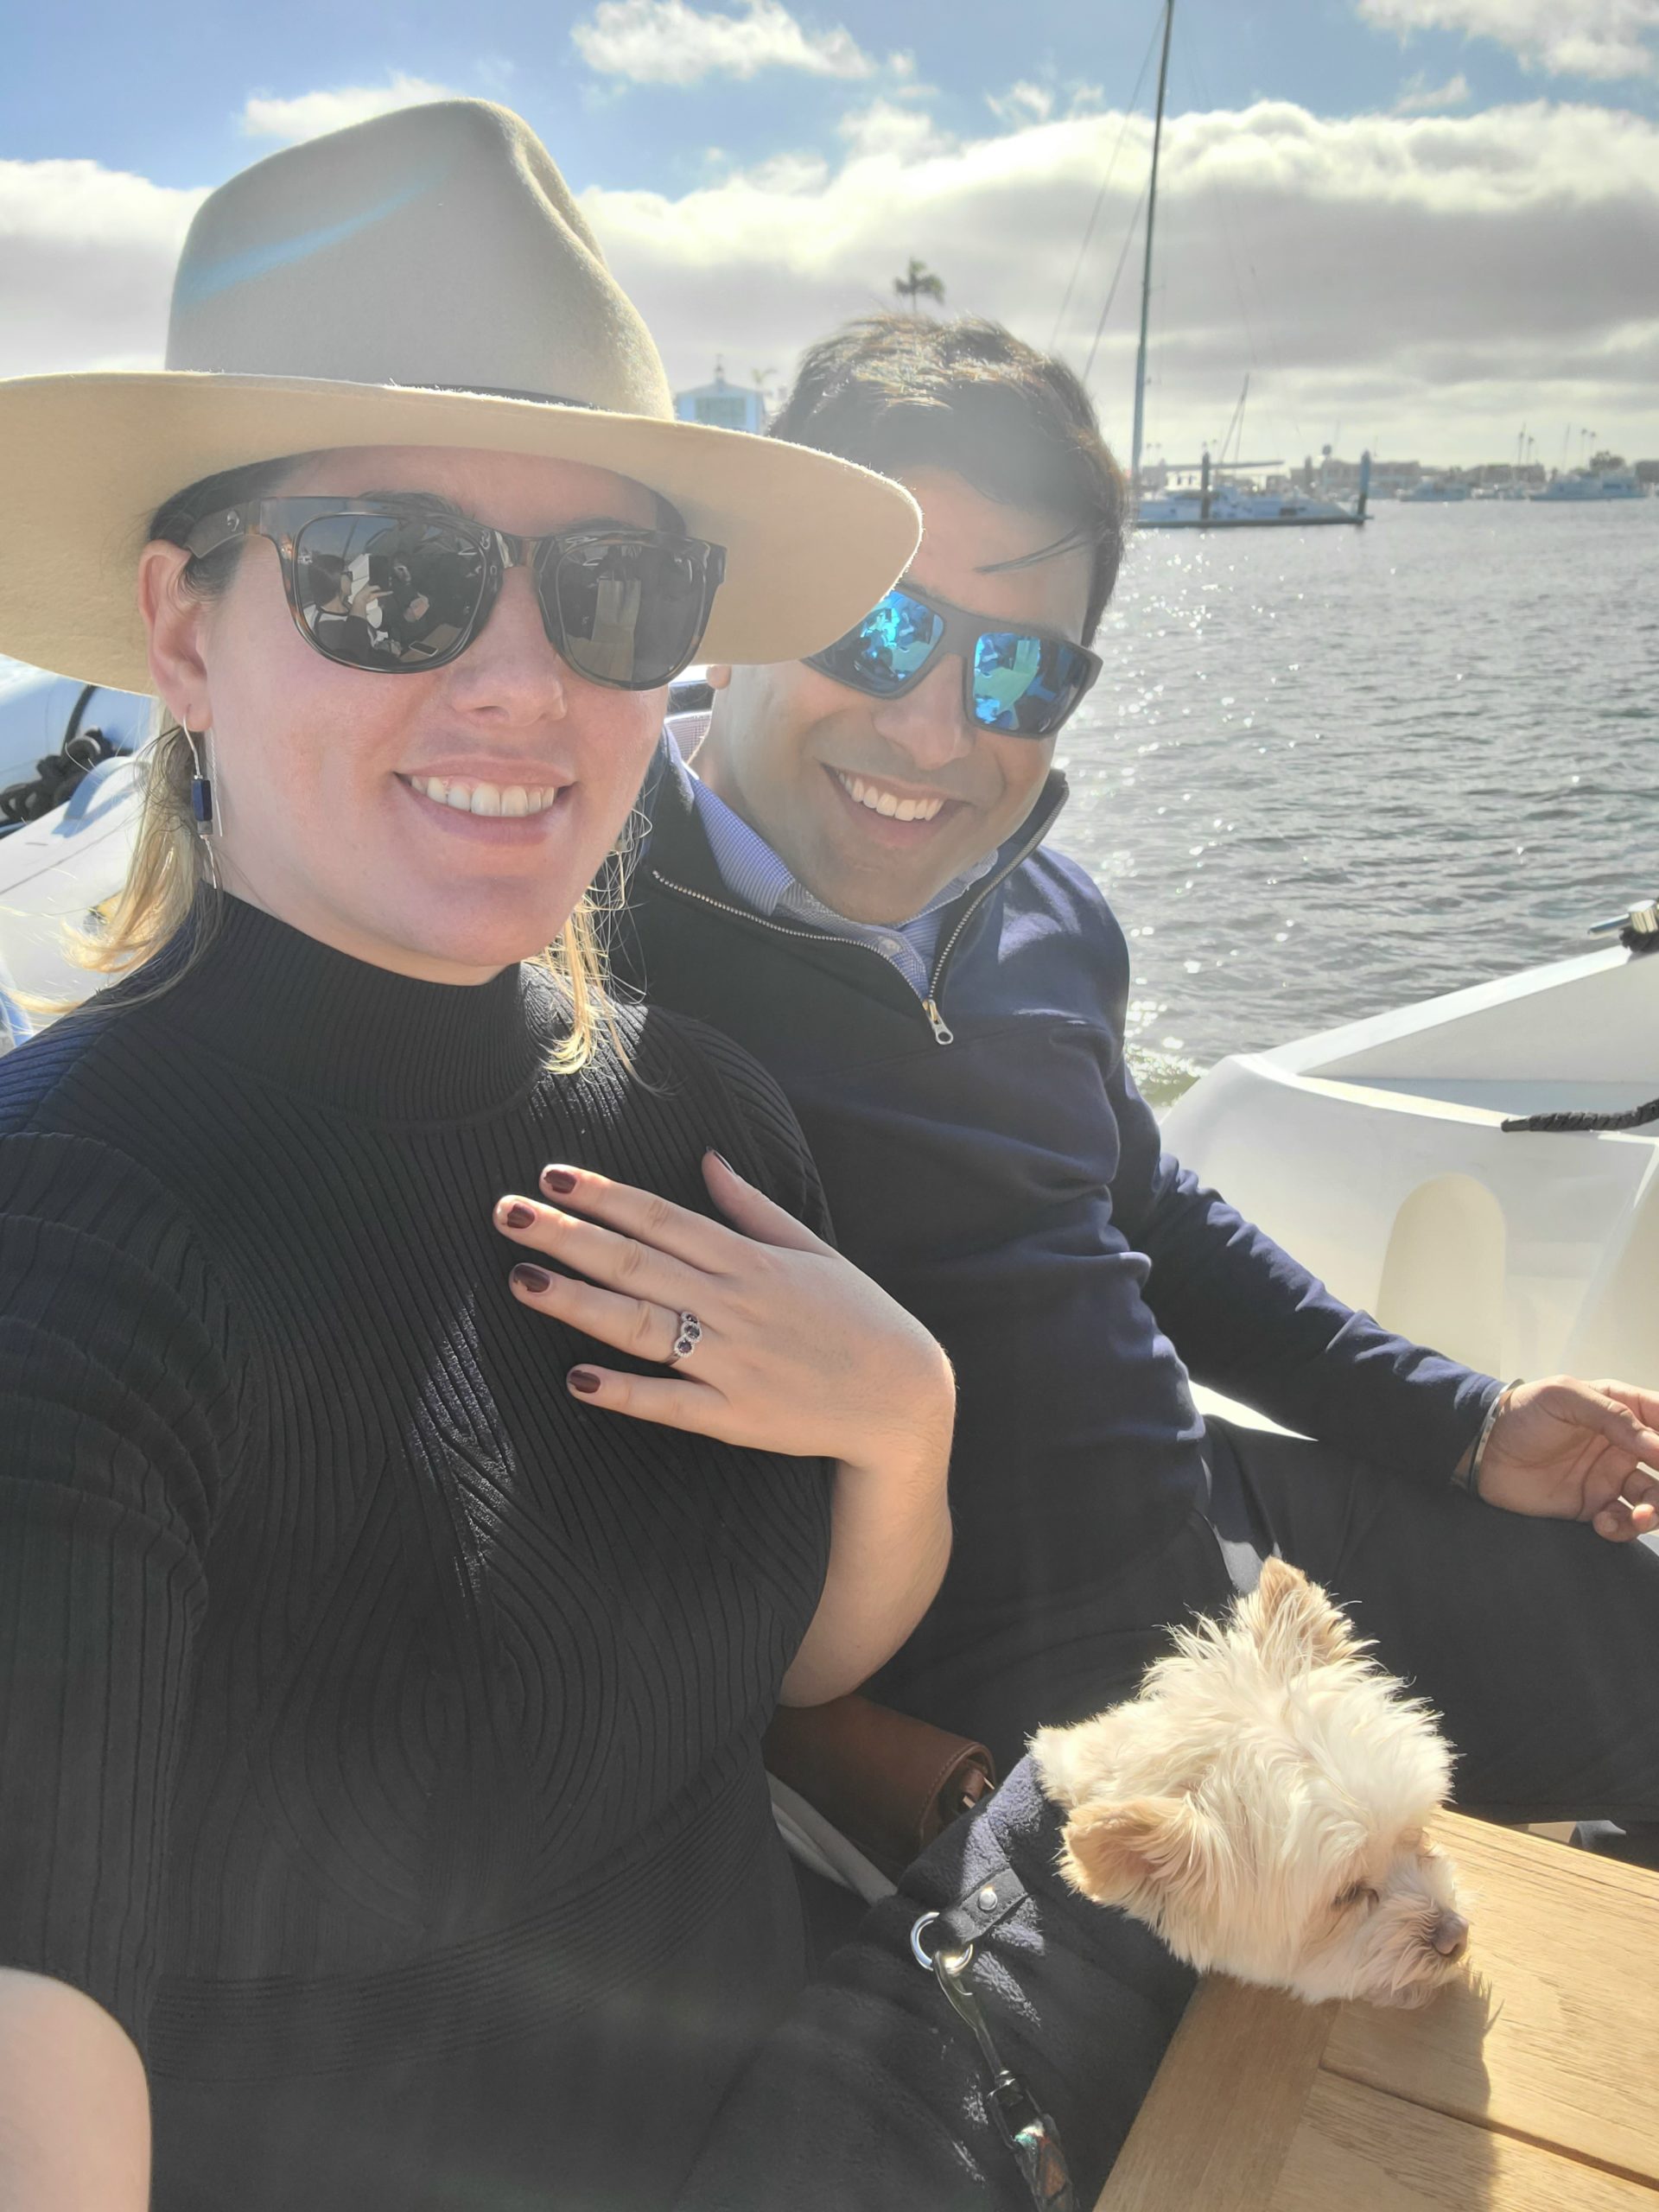 Michelle Mealer with her fiance showing of her engagement ring